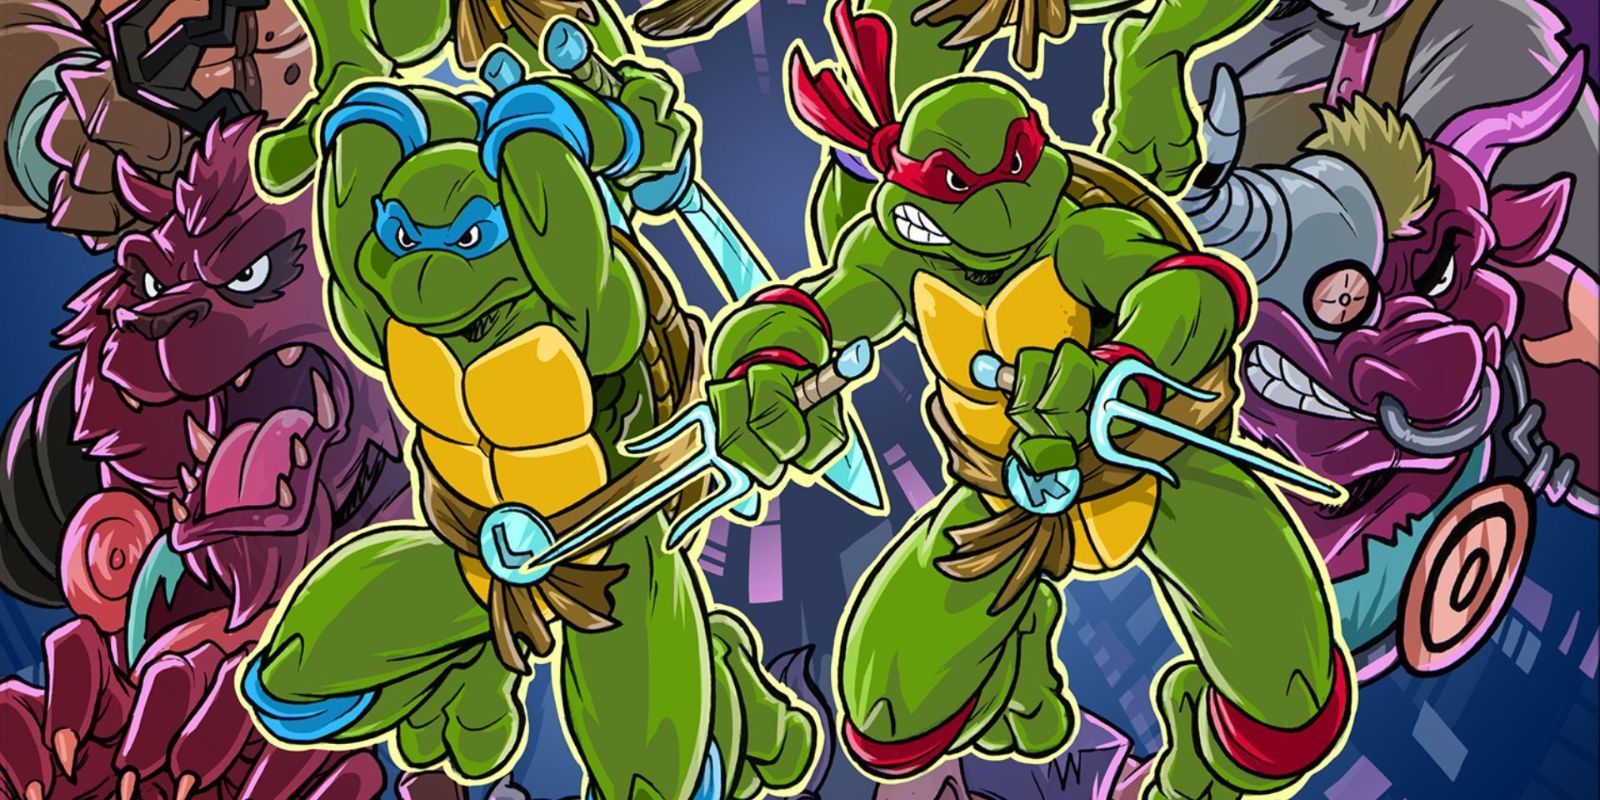 Leonardo and Raphael from the 1987 TMNT cartoon leaping into action